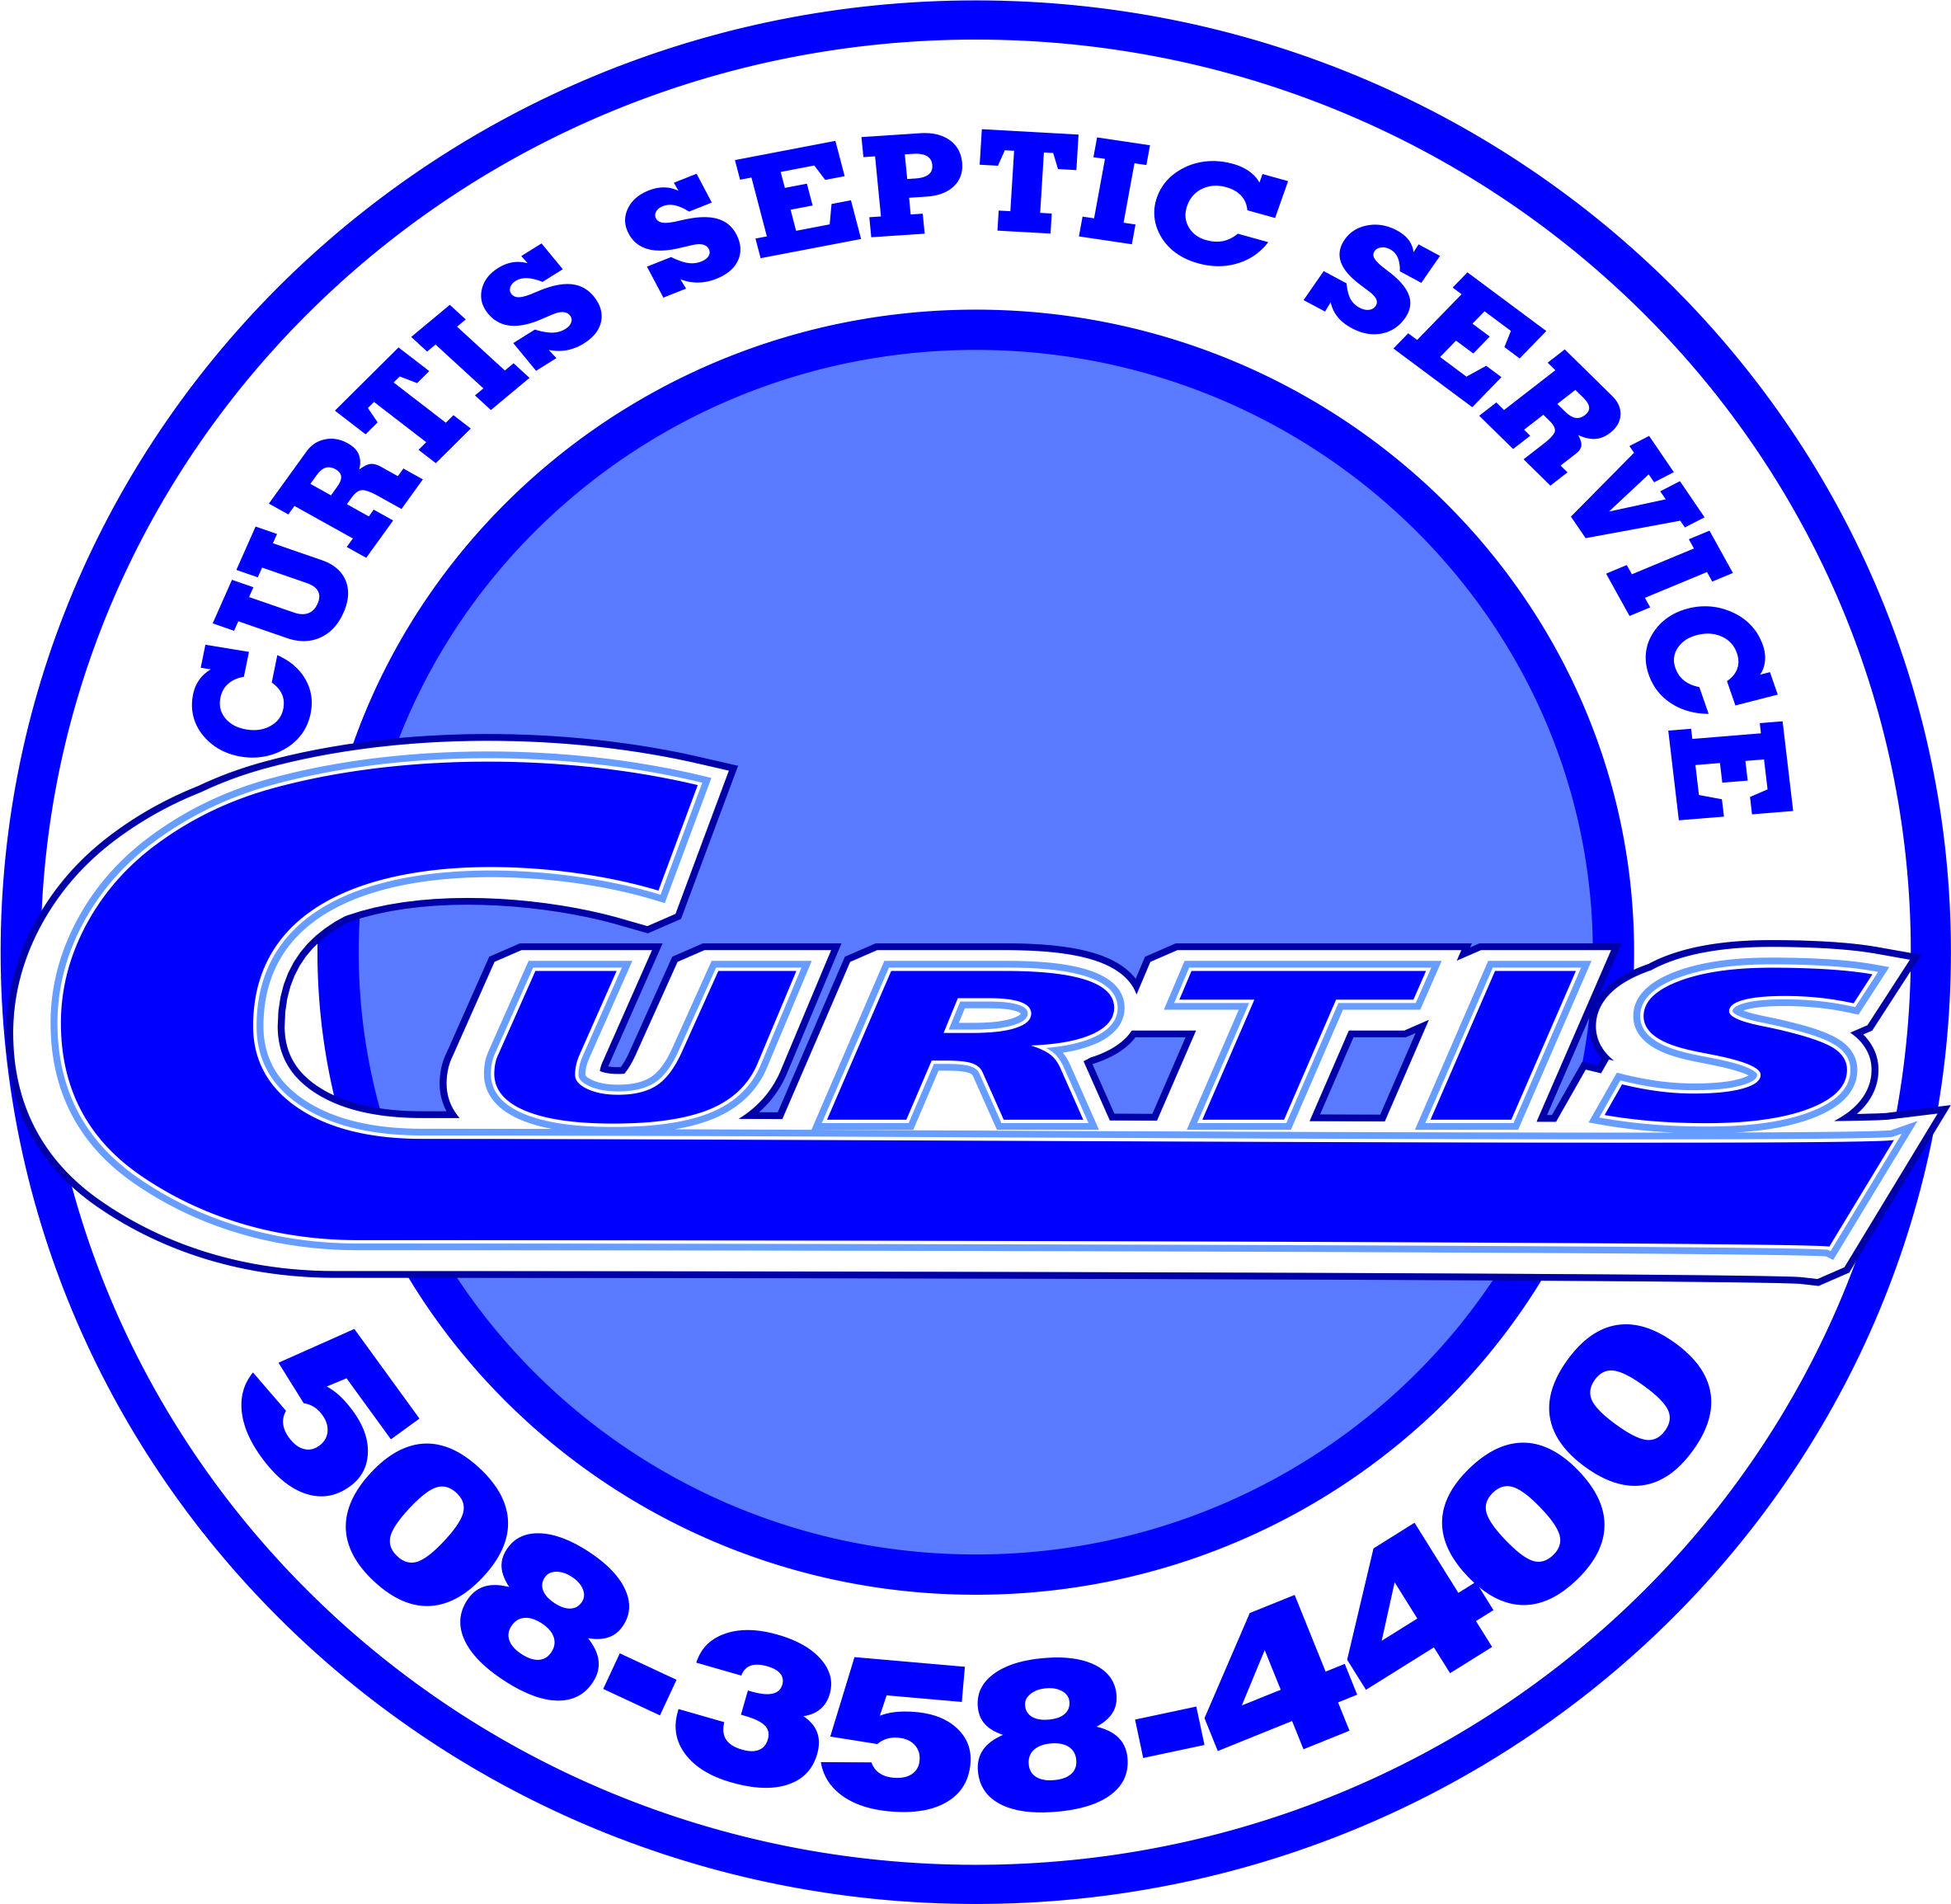 Septic system inspectors in Weston, MA.